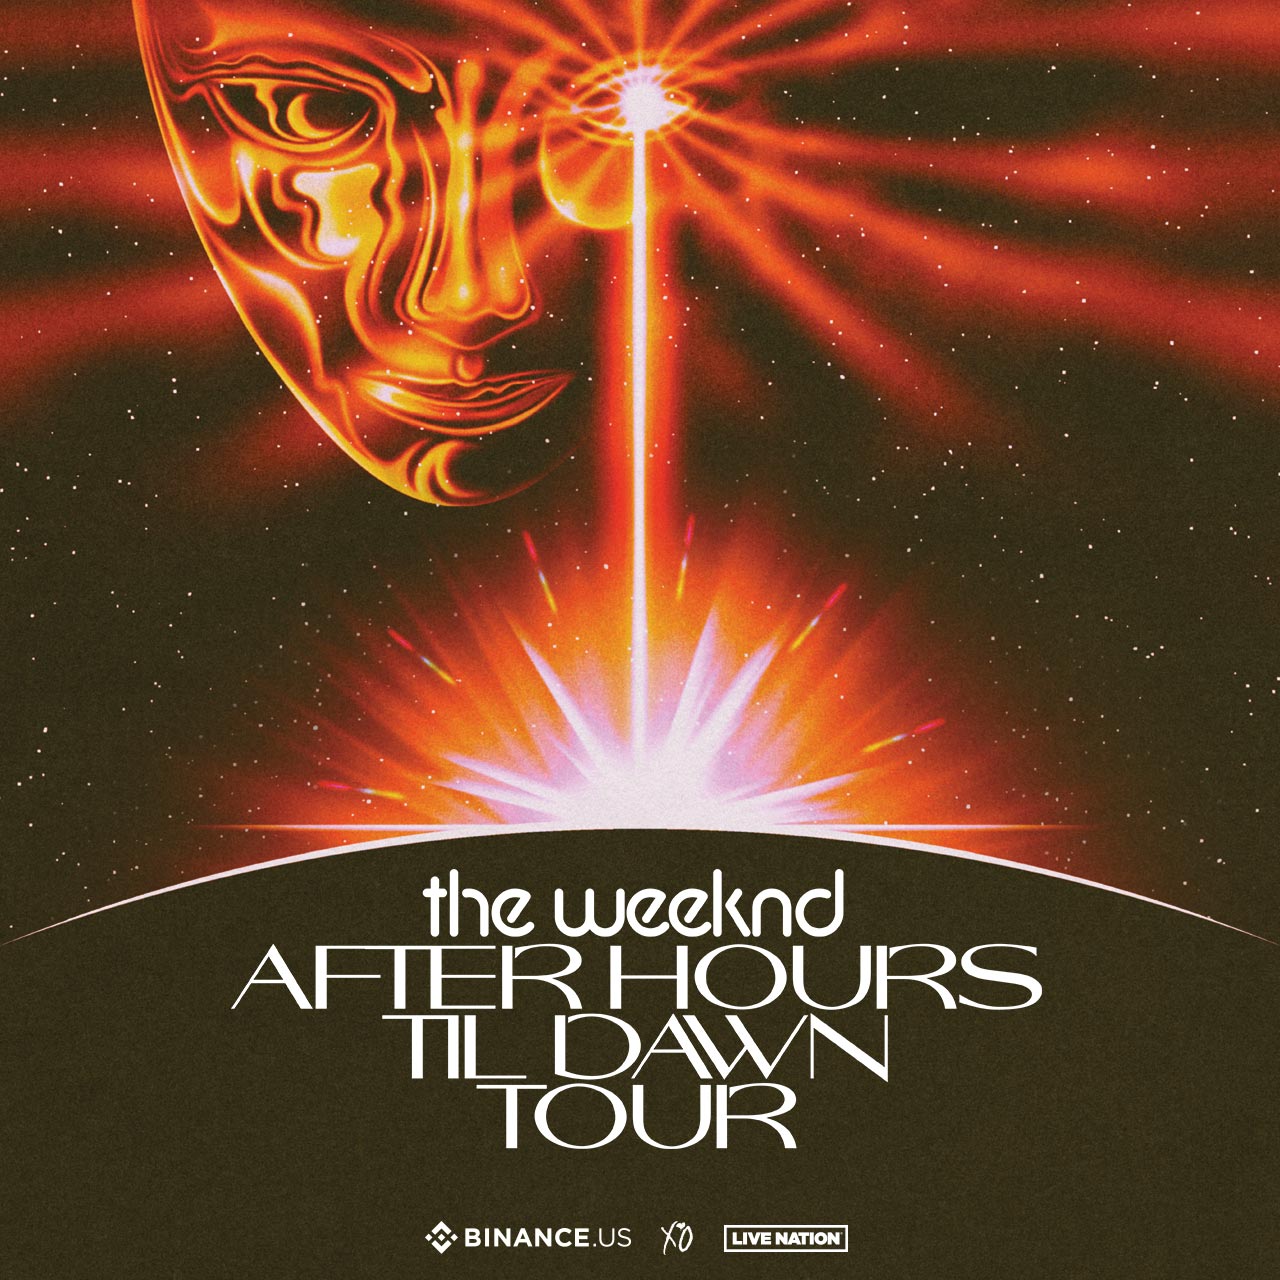 the weeknd tour history